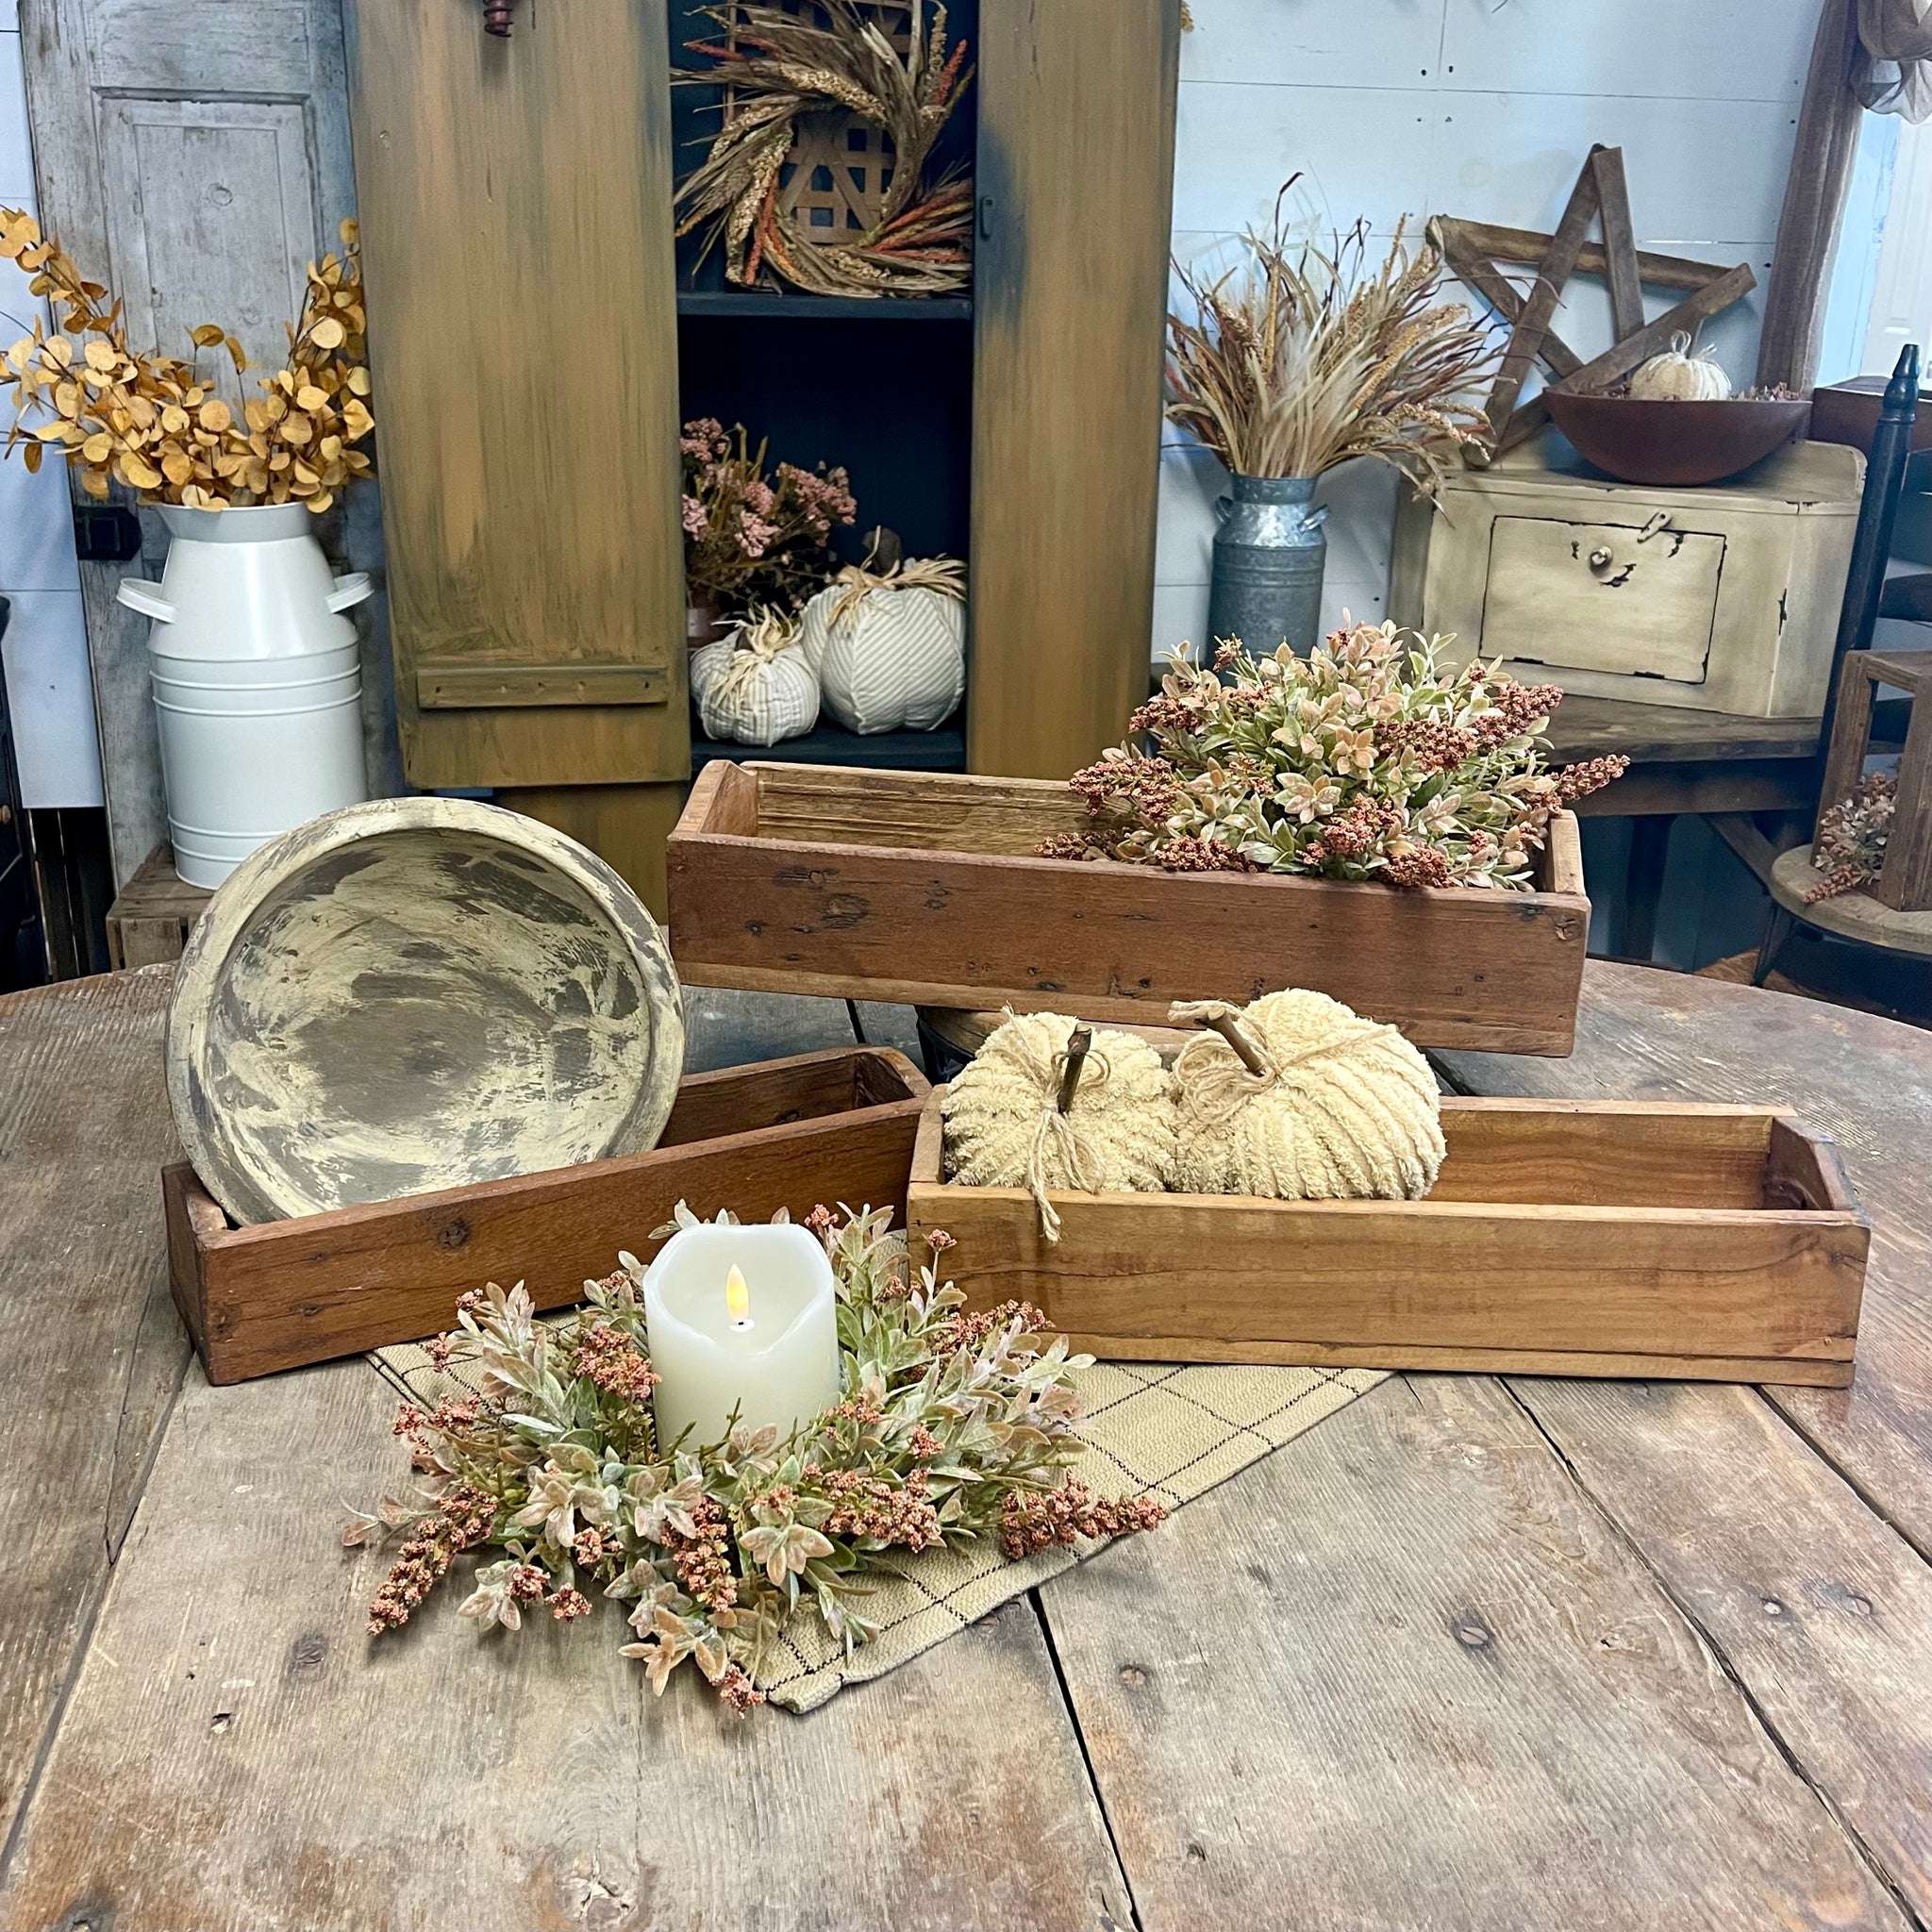 Reclaimed Wooden Boxes | Set of 3 | FREE Half Sphere INCLUDED - Limited TIME!